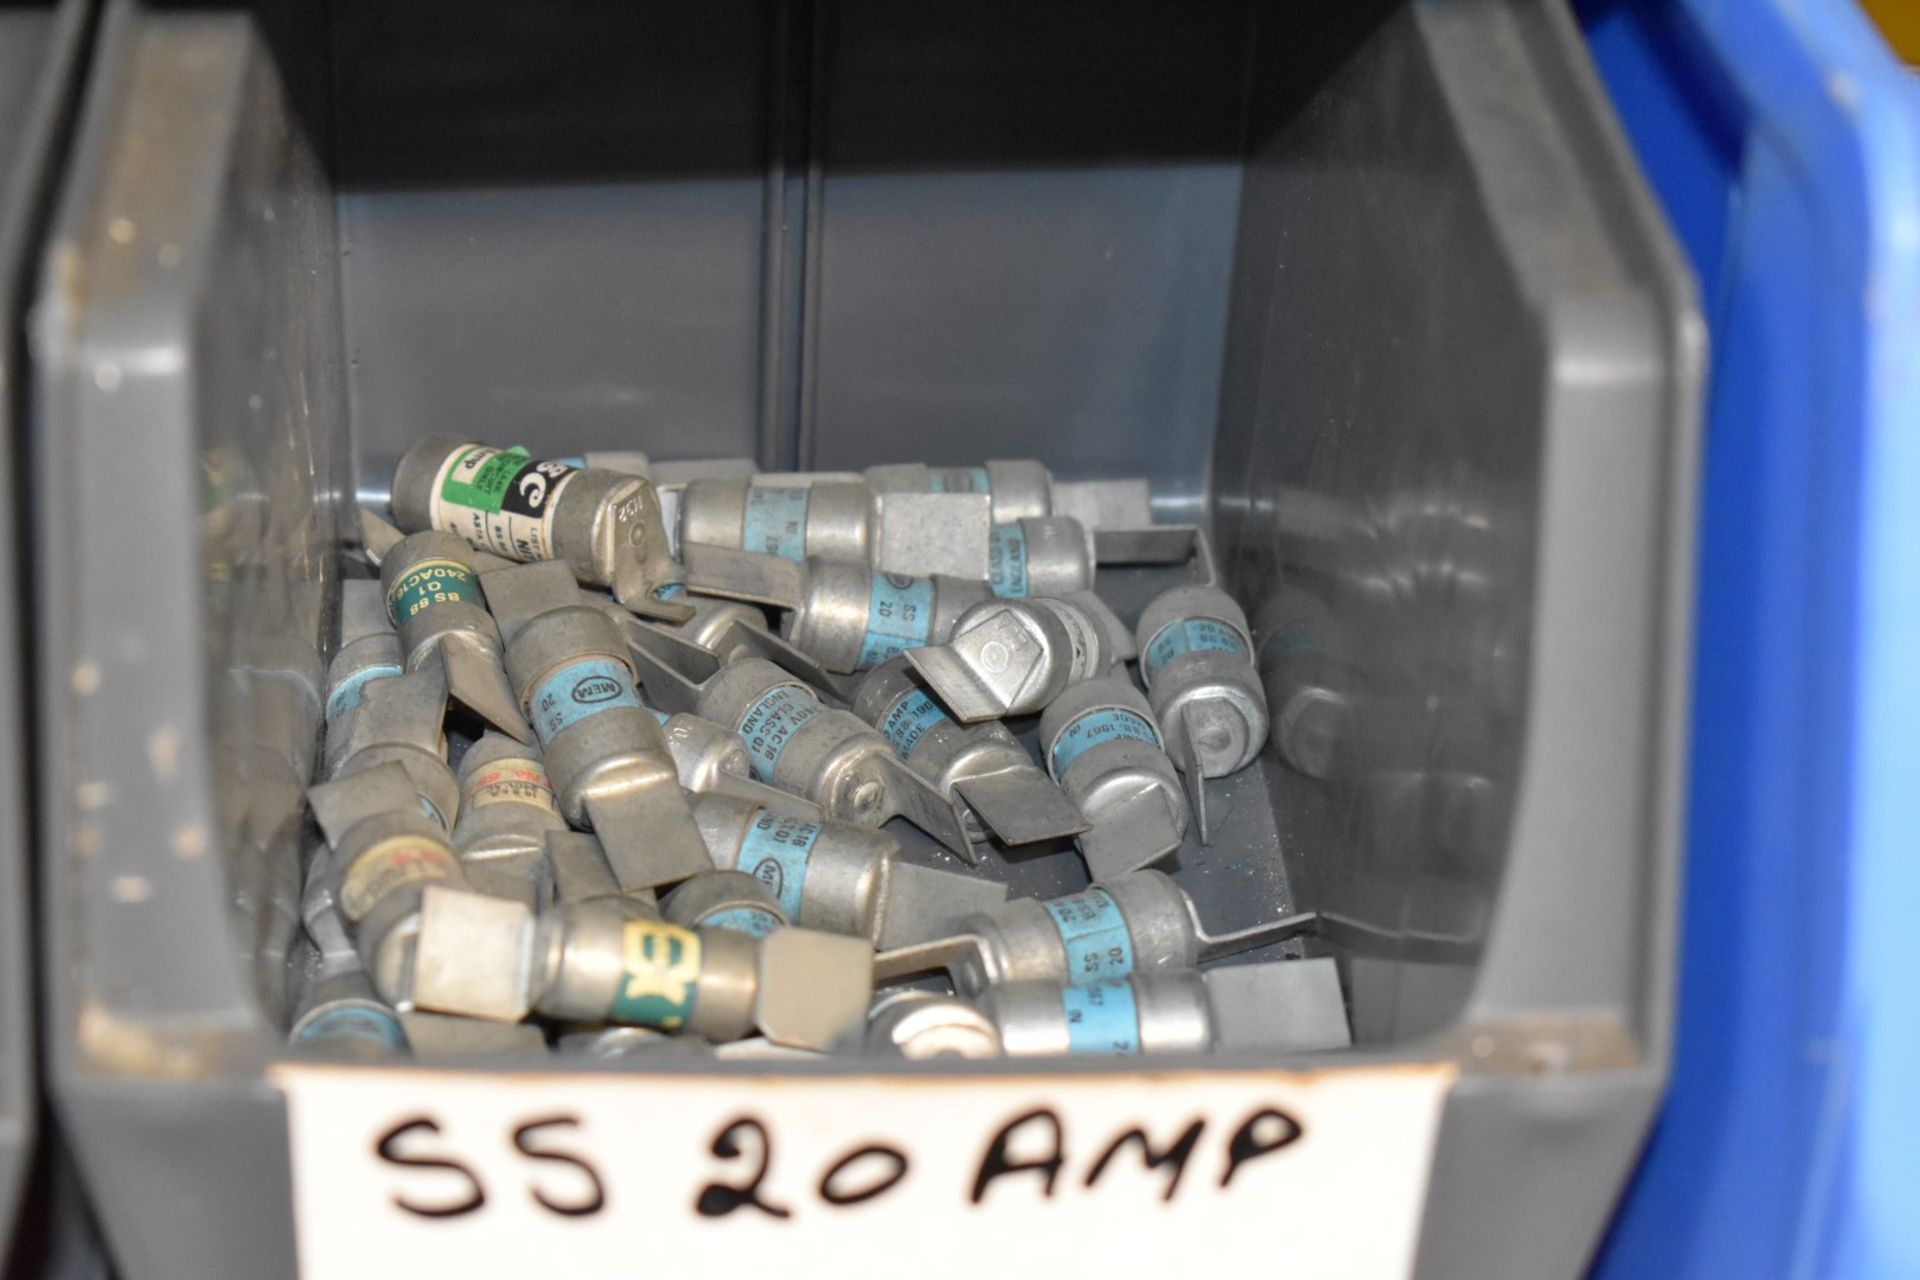 10 x Linbins With Contents - Includes Various Industrial 110v Plugs/Sockets & Industrial Fuses - Image 9 of 13